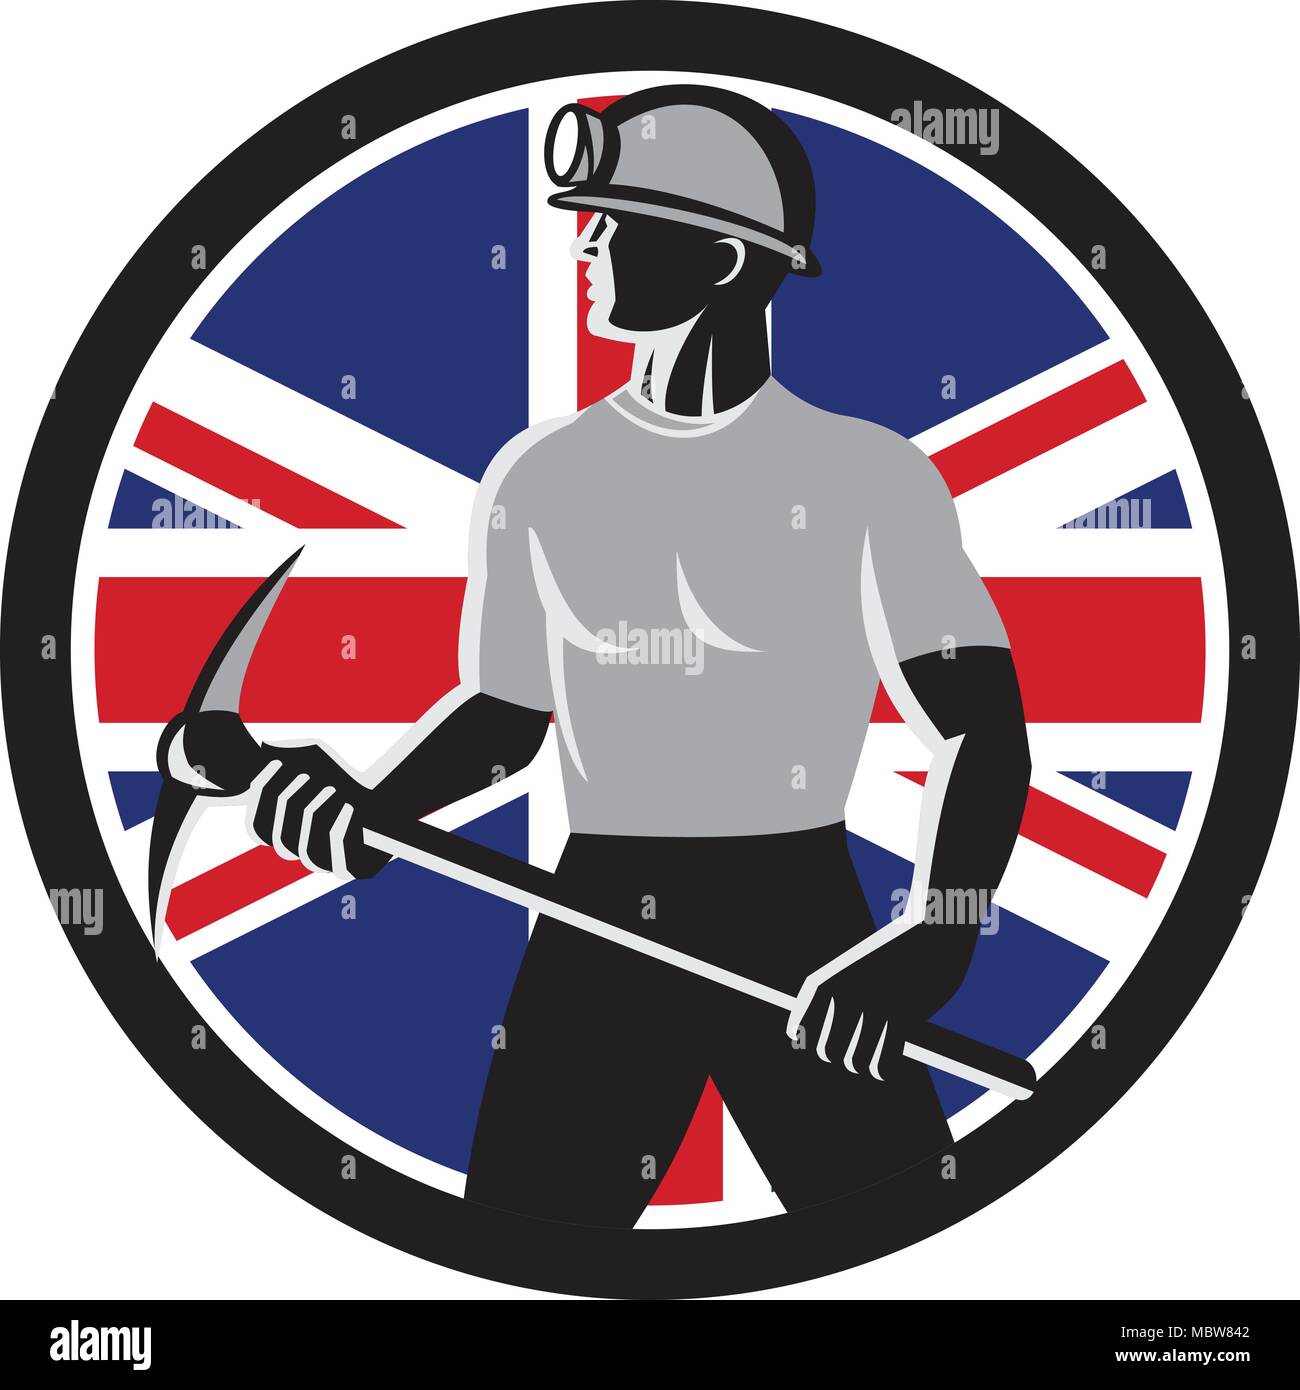 Icon retro style illustration of a British coal miner holding a pick axe viewed from side with United Kingdom UK, Great Britain Union Jack flag set in Stock Vector